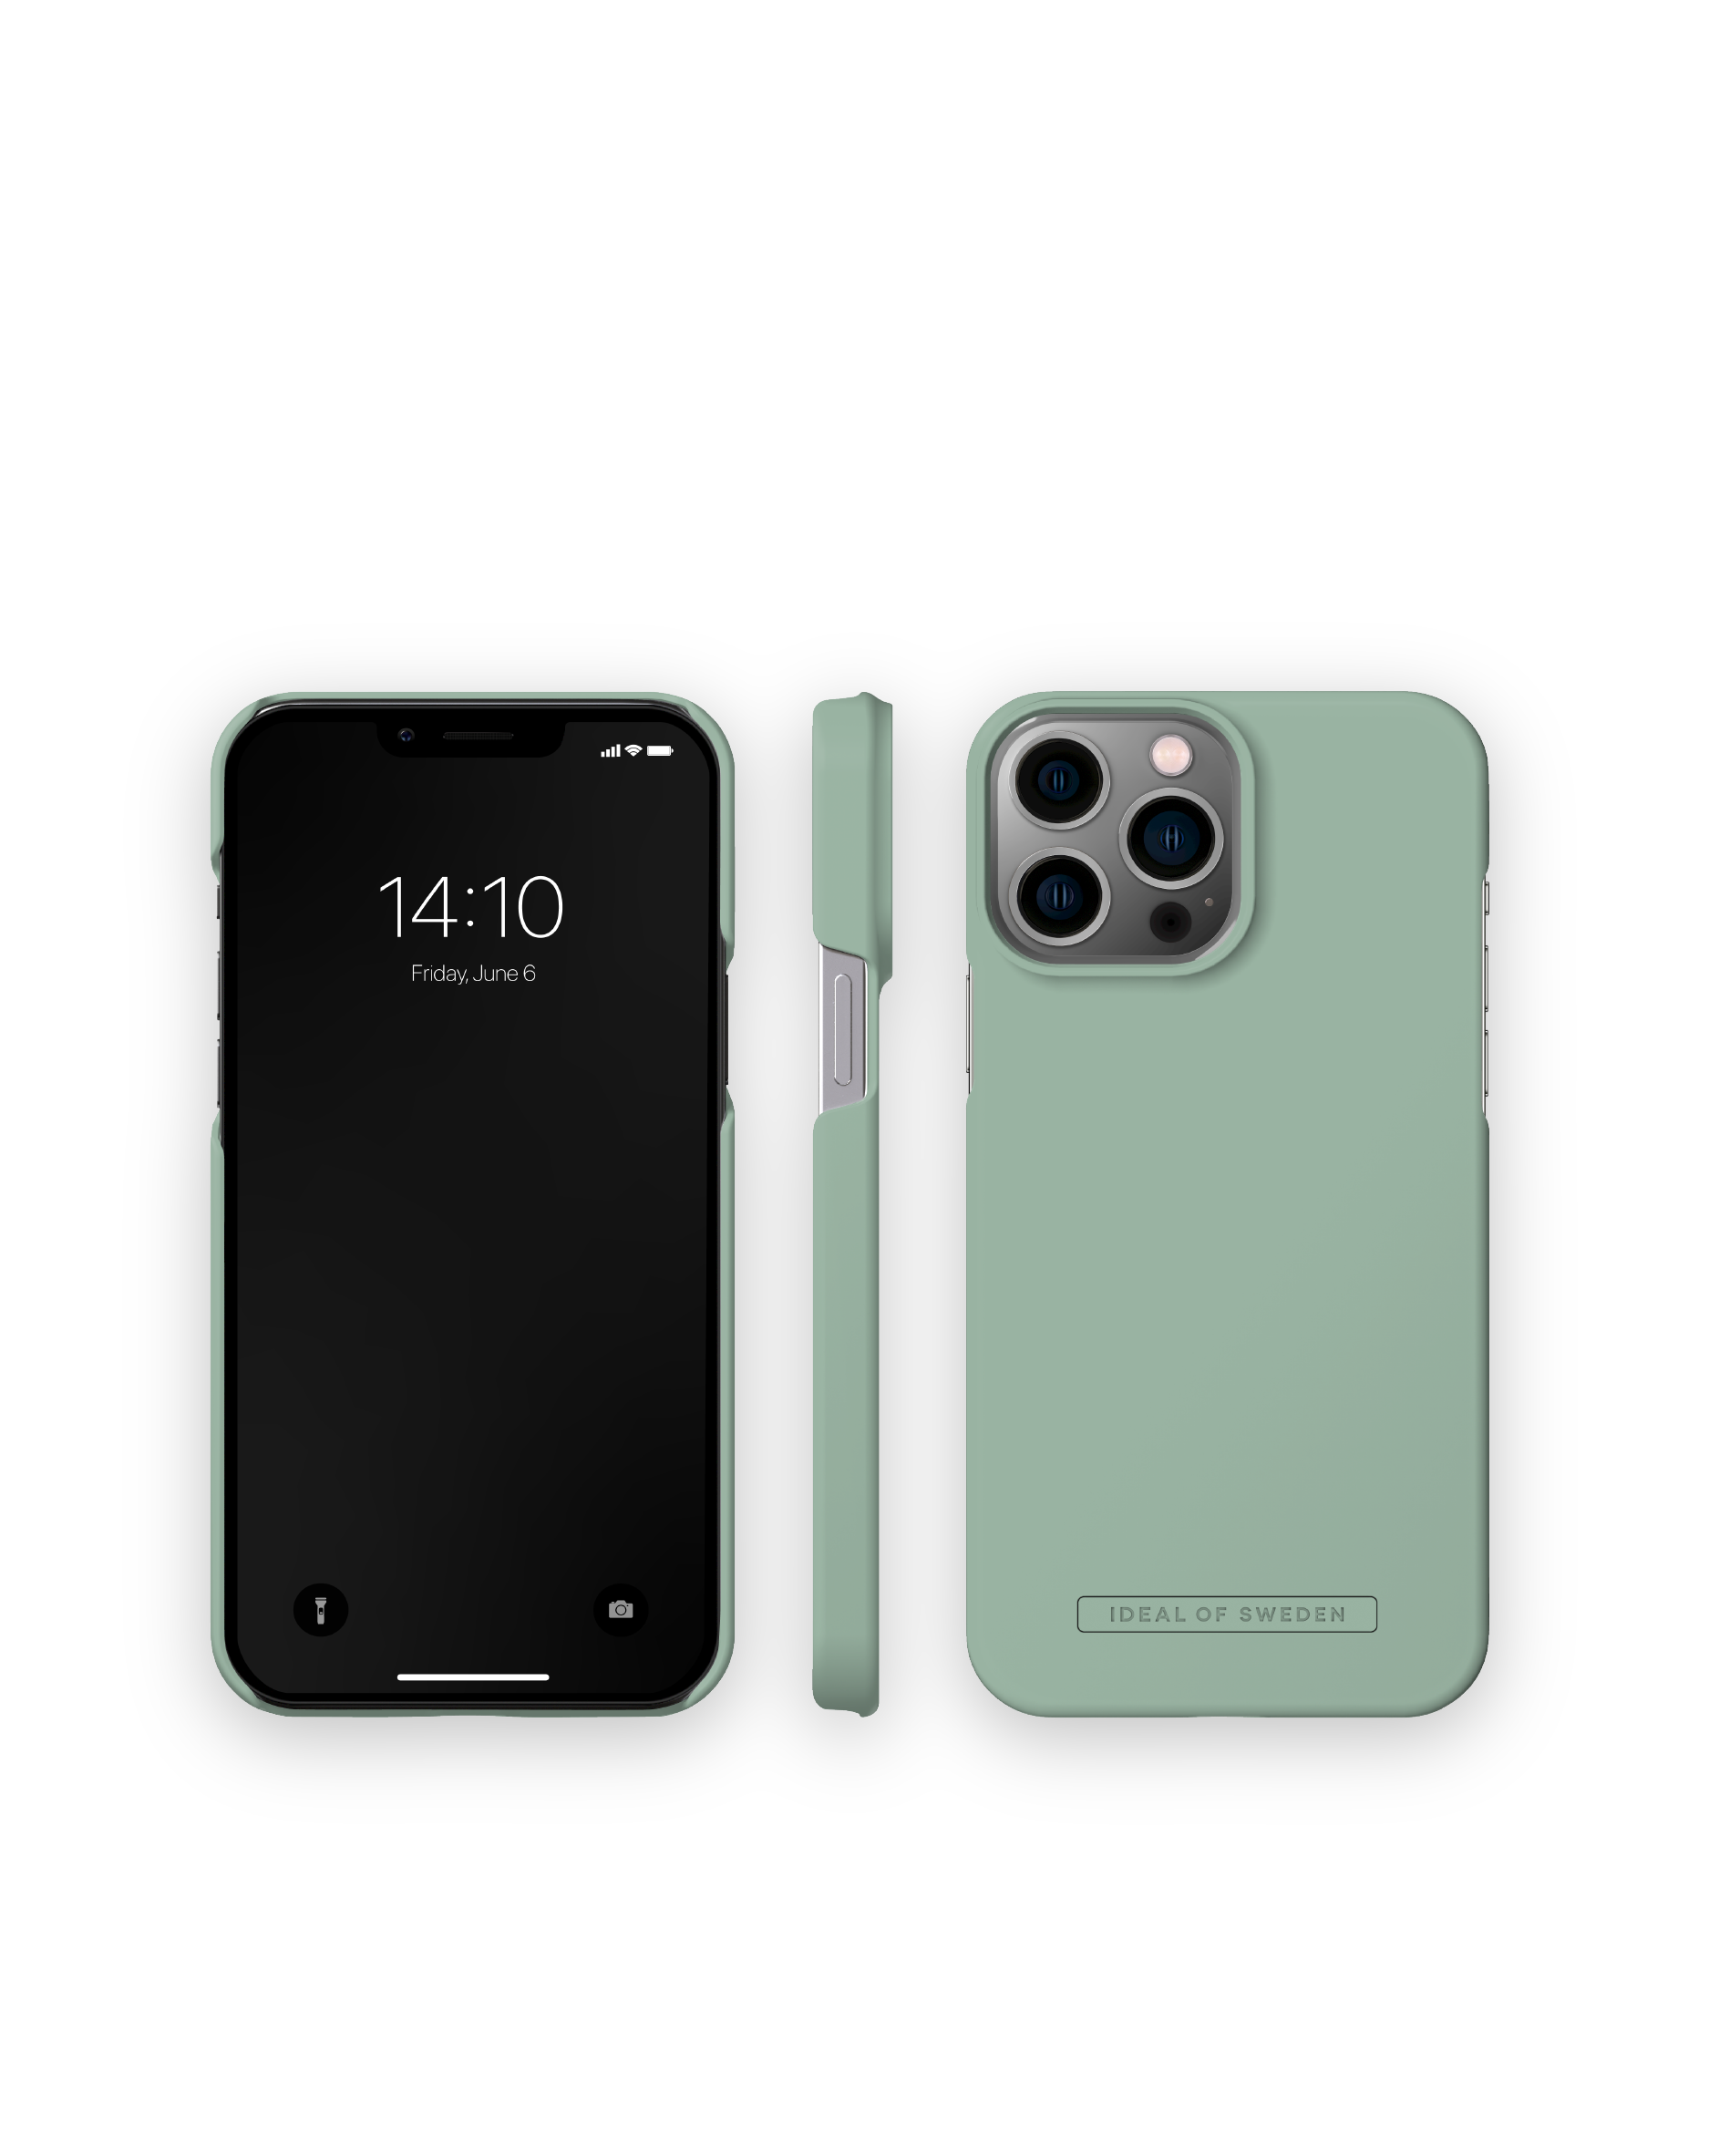 IDEAL OF Apple, Backcover, Max, IDFCSS22-I2267P-419, Green SWEDEN iPhone 14 Pro Sage